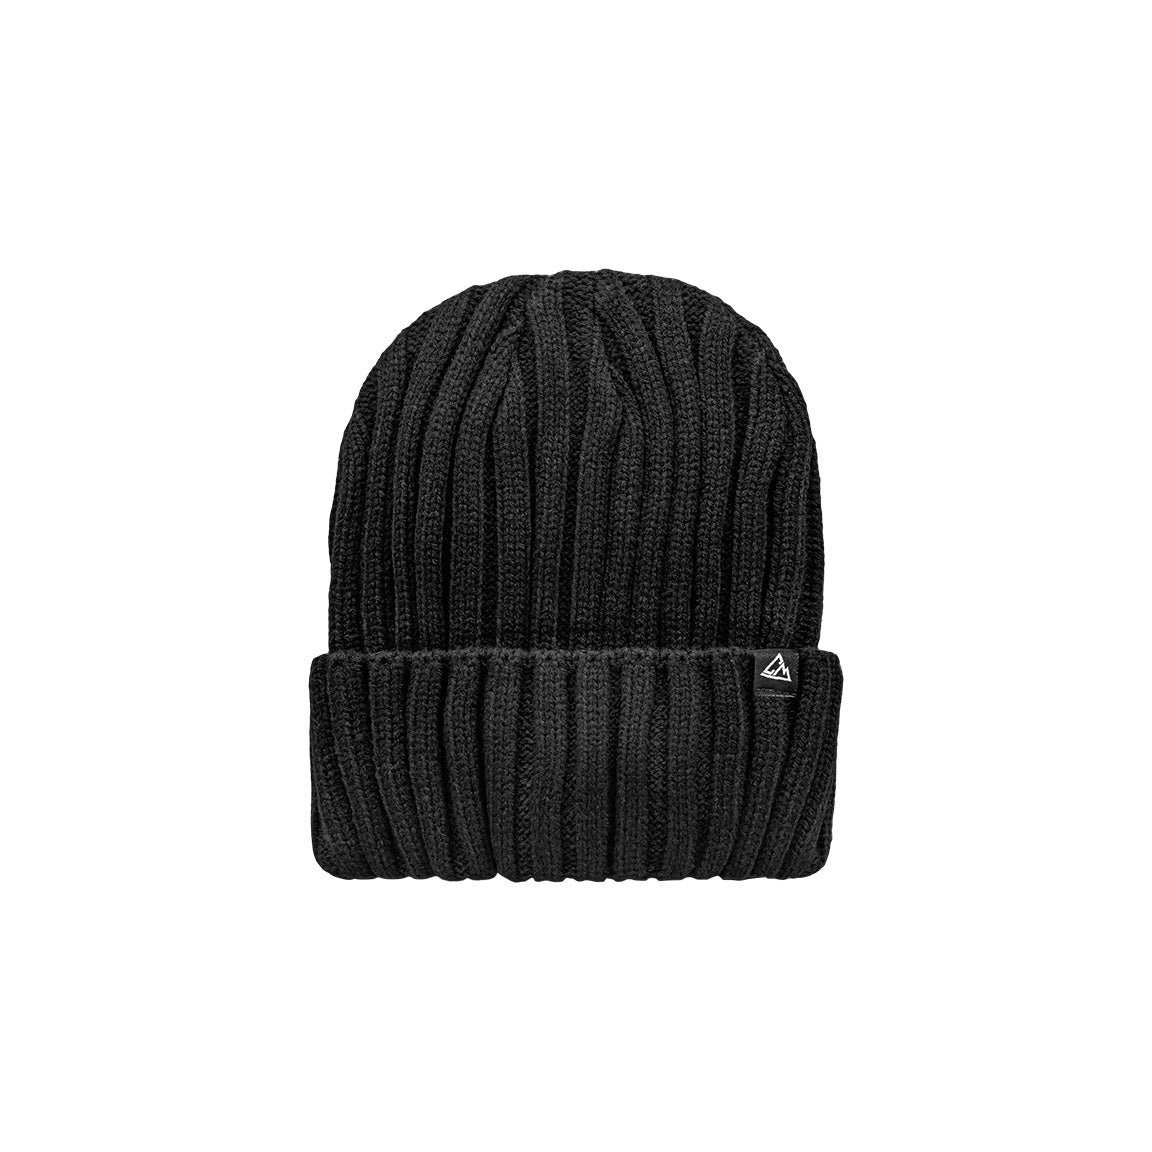 A black ribbed beanie with a turned-up cuff and a small triangular logo patch on the side.